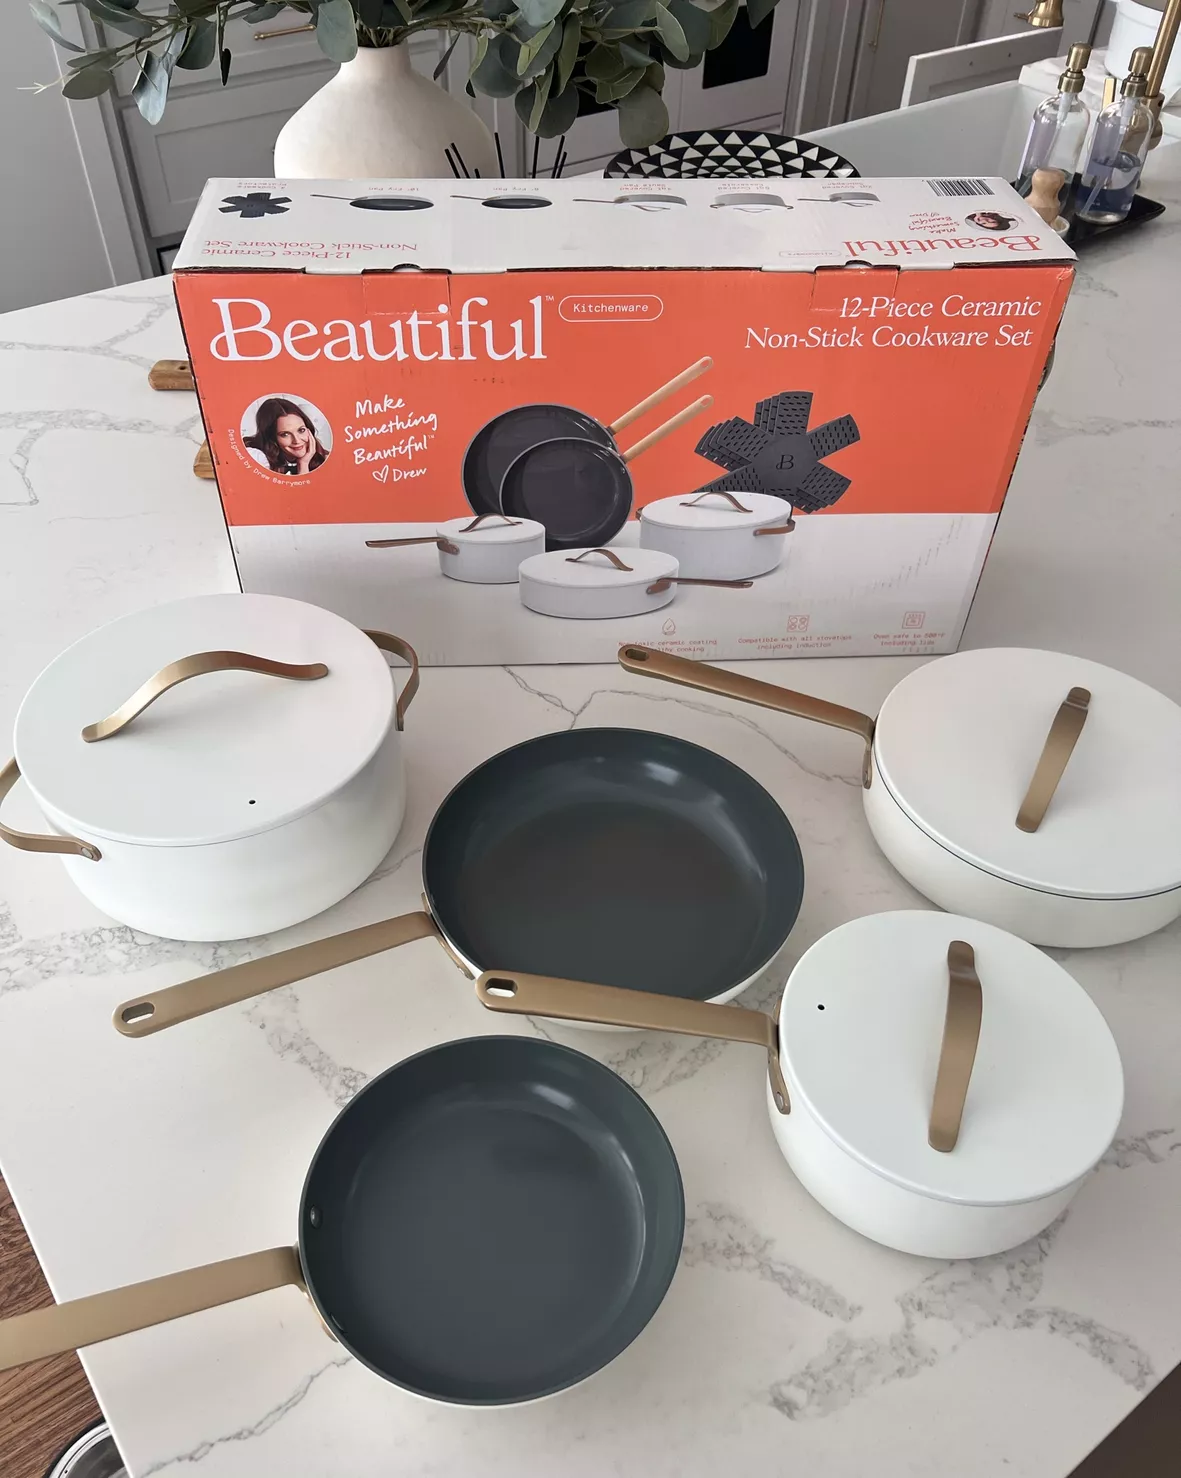 Beautiful 12pc Ceramic Non-Stick Cookware Set, White Icing by Drew Barrymore